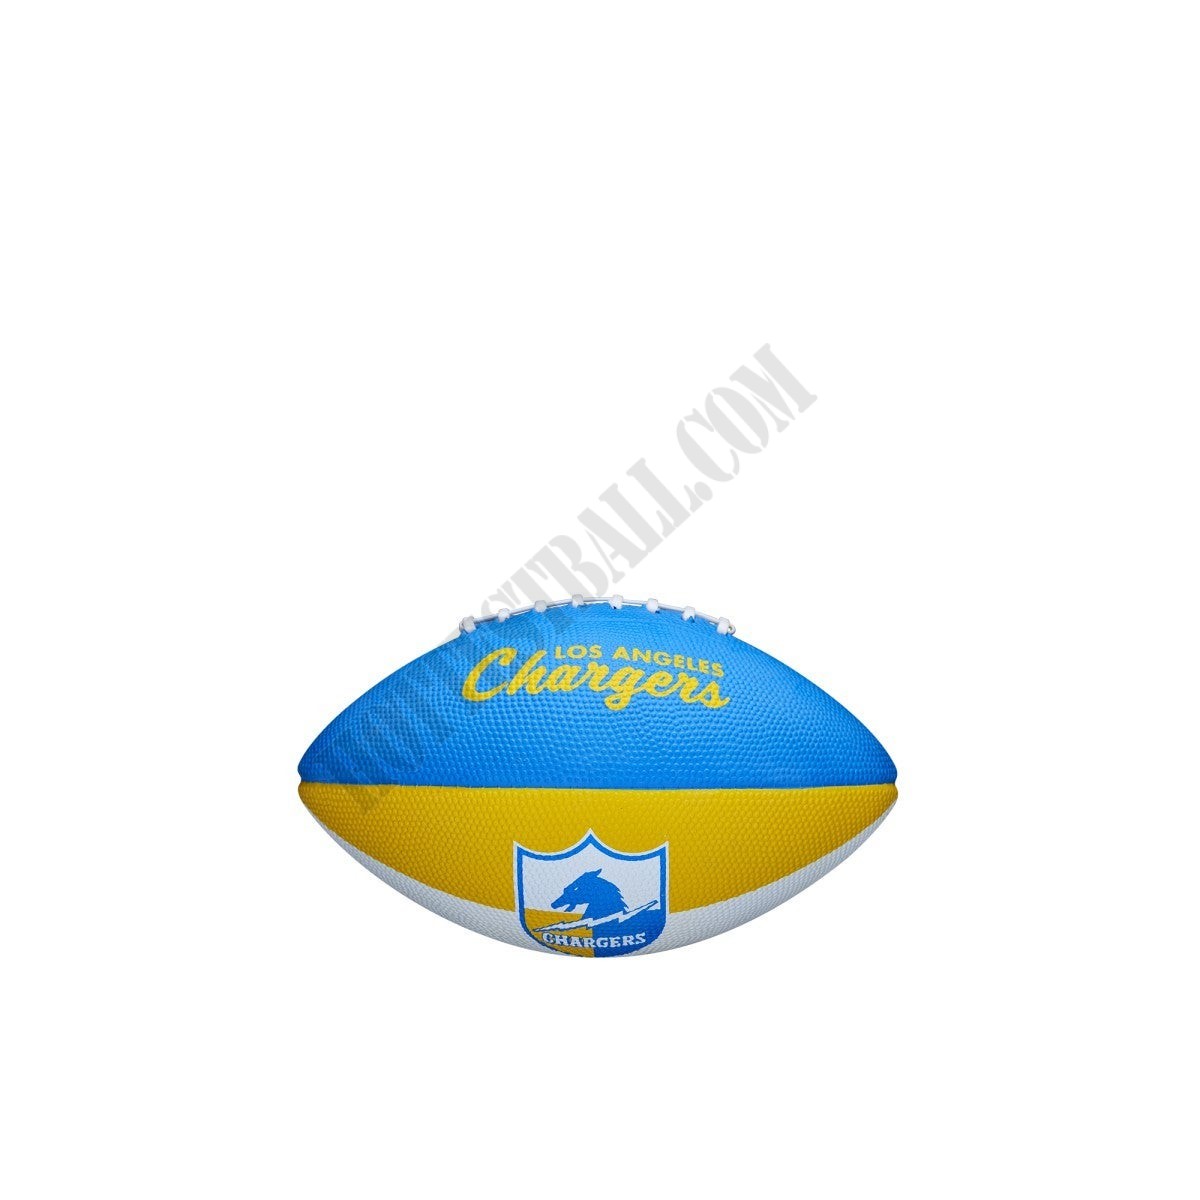 NFL Retro Mini Football - Los Angeles Chargers - Wilson Discount Store - -4